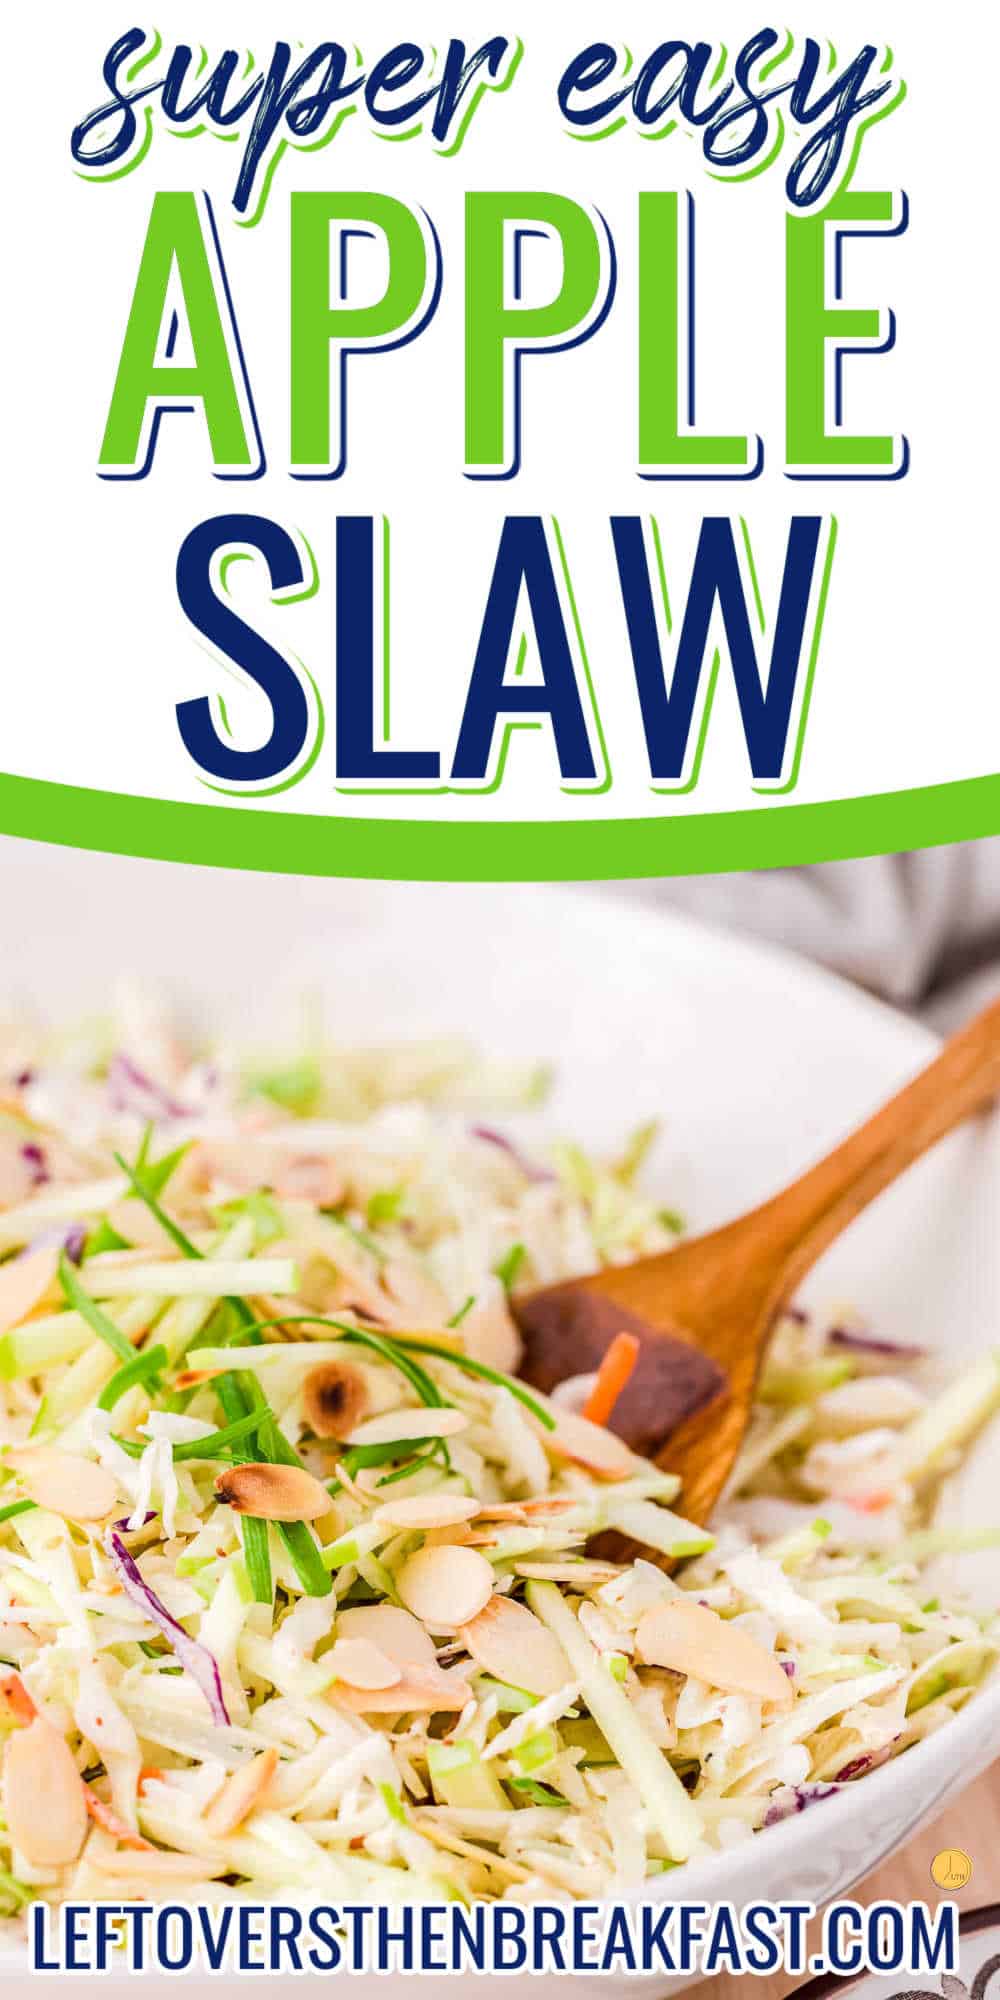 bowl of slaw with white banner and text "super easy apple slaw"